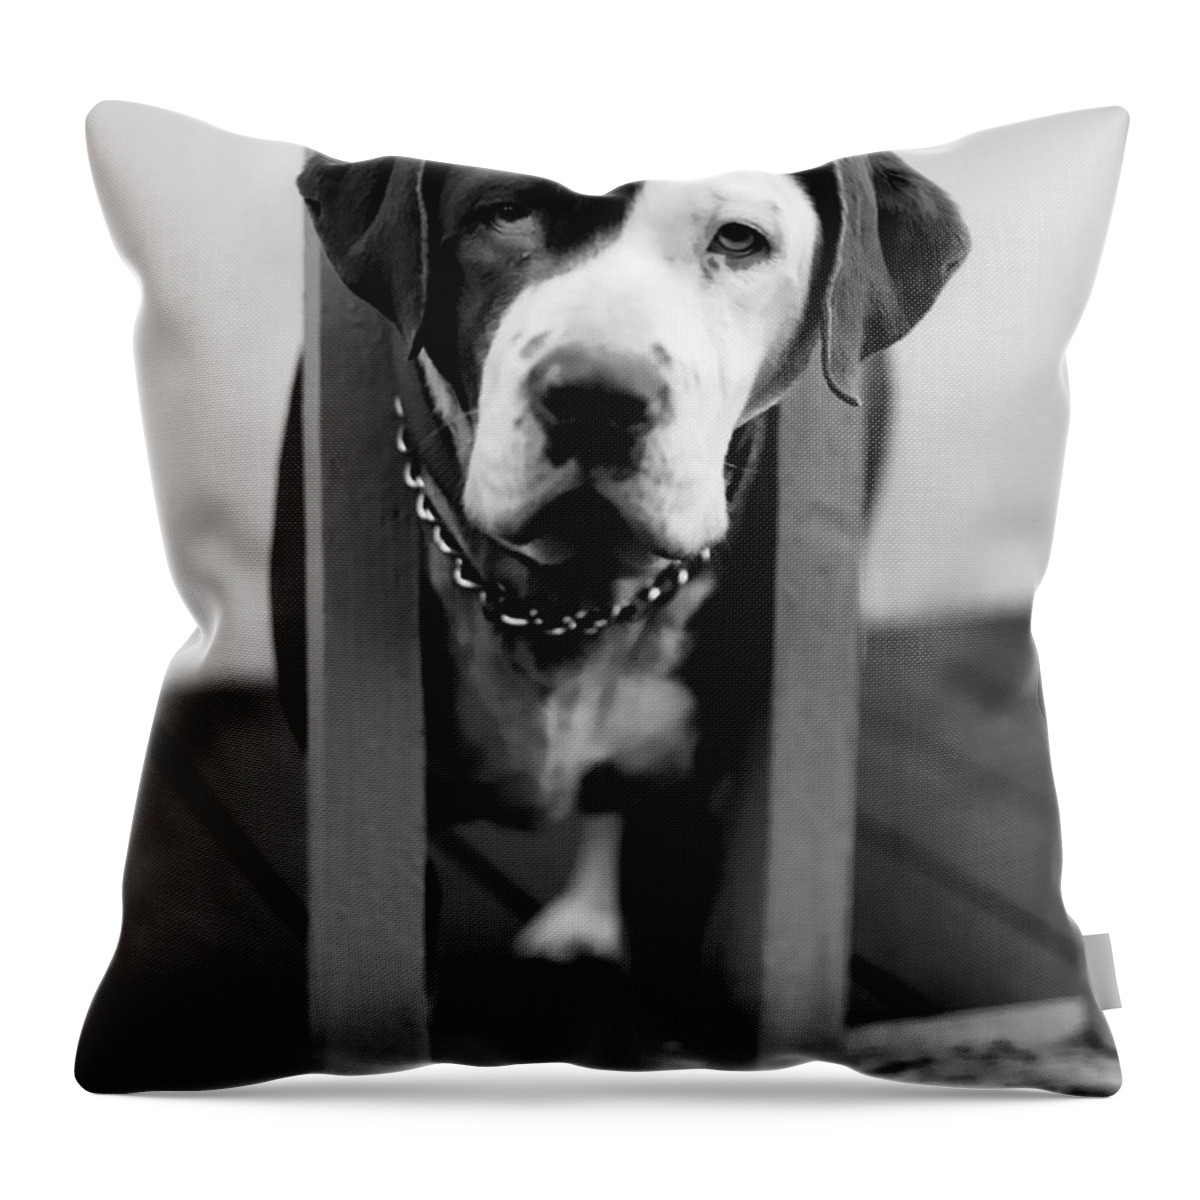 Black And White Throw Pillow featuring the photograph So Sad by Peter Piatt